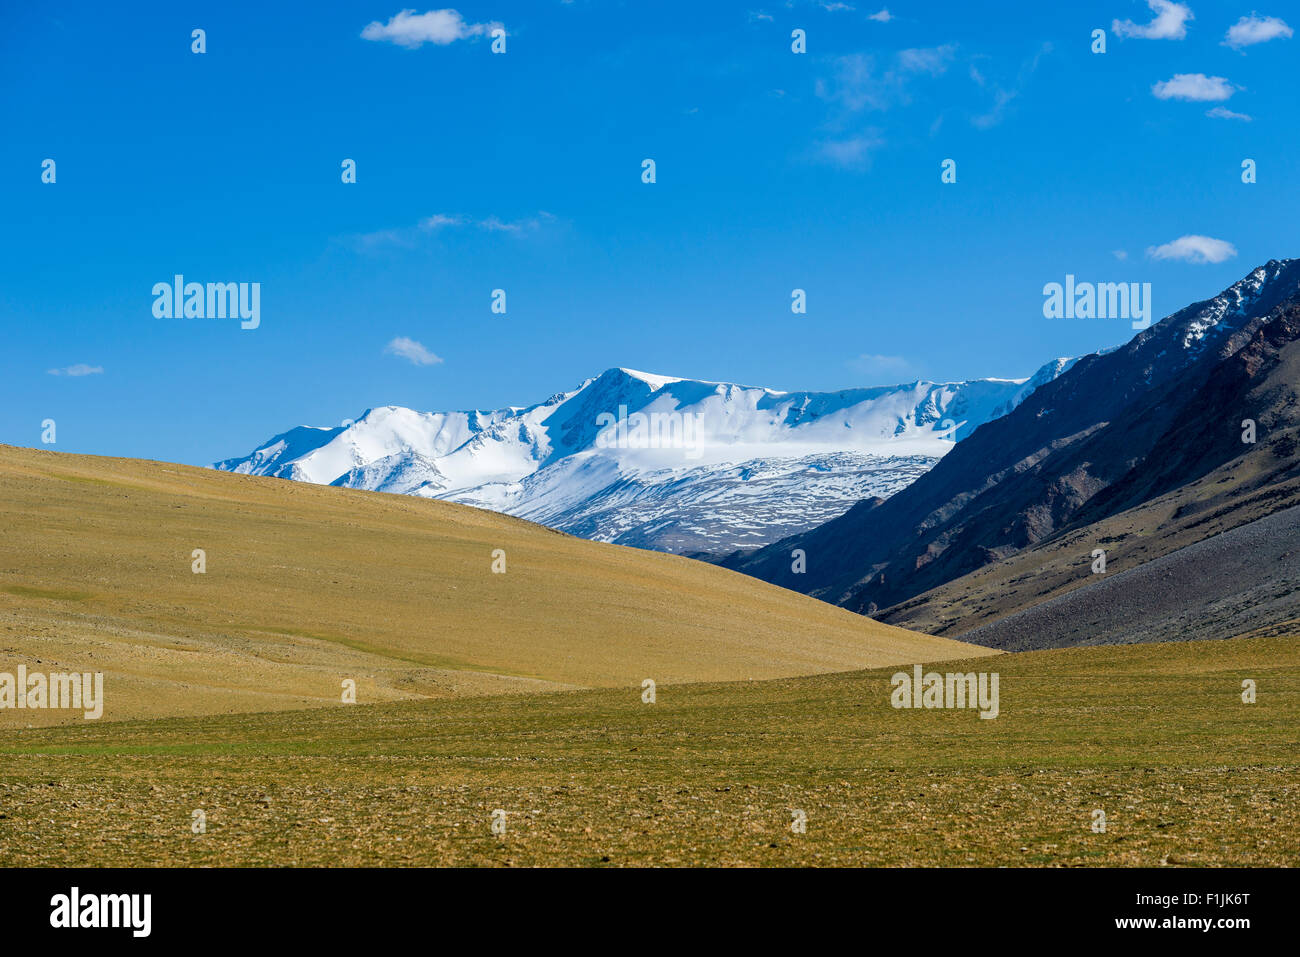 Barren landscape with snow capped mountains, Changtang area, Korzok, Jammu and Kashmir, India Stock Photo